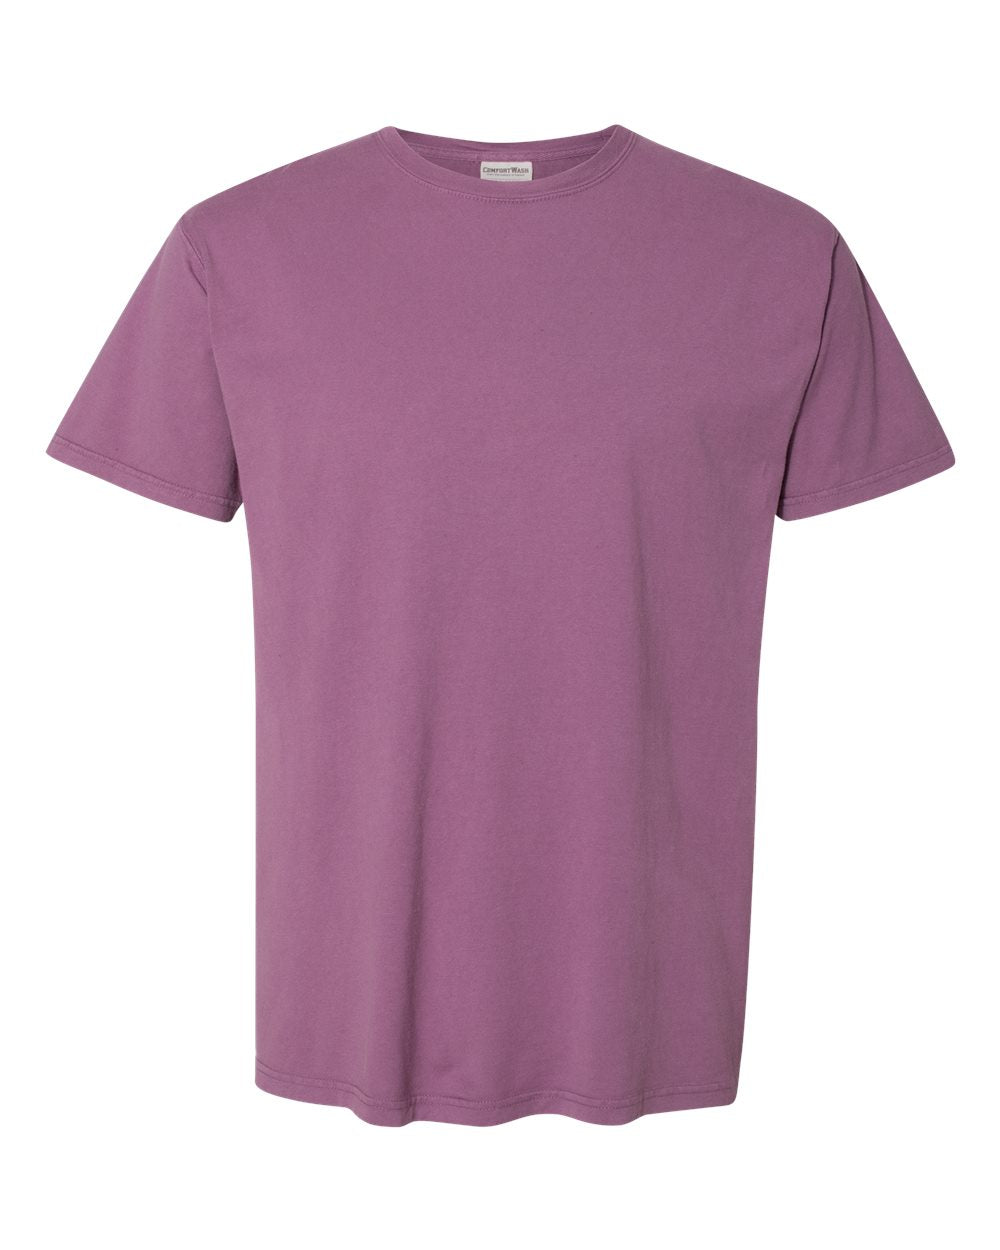 Comfort Wash by Hanes - Garment Dyed T-Shirt